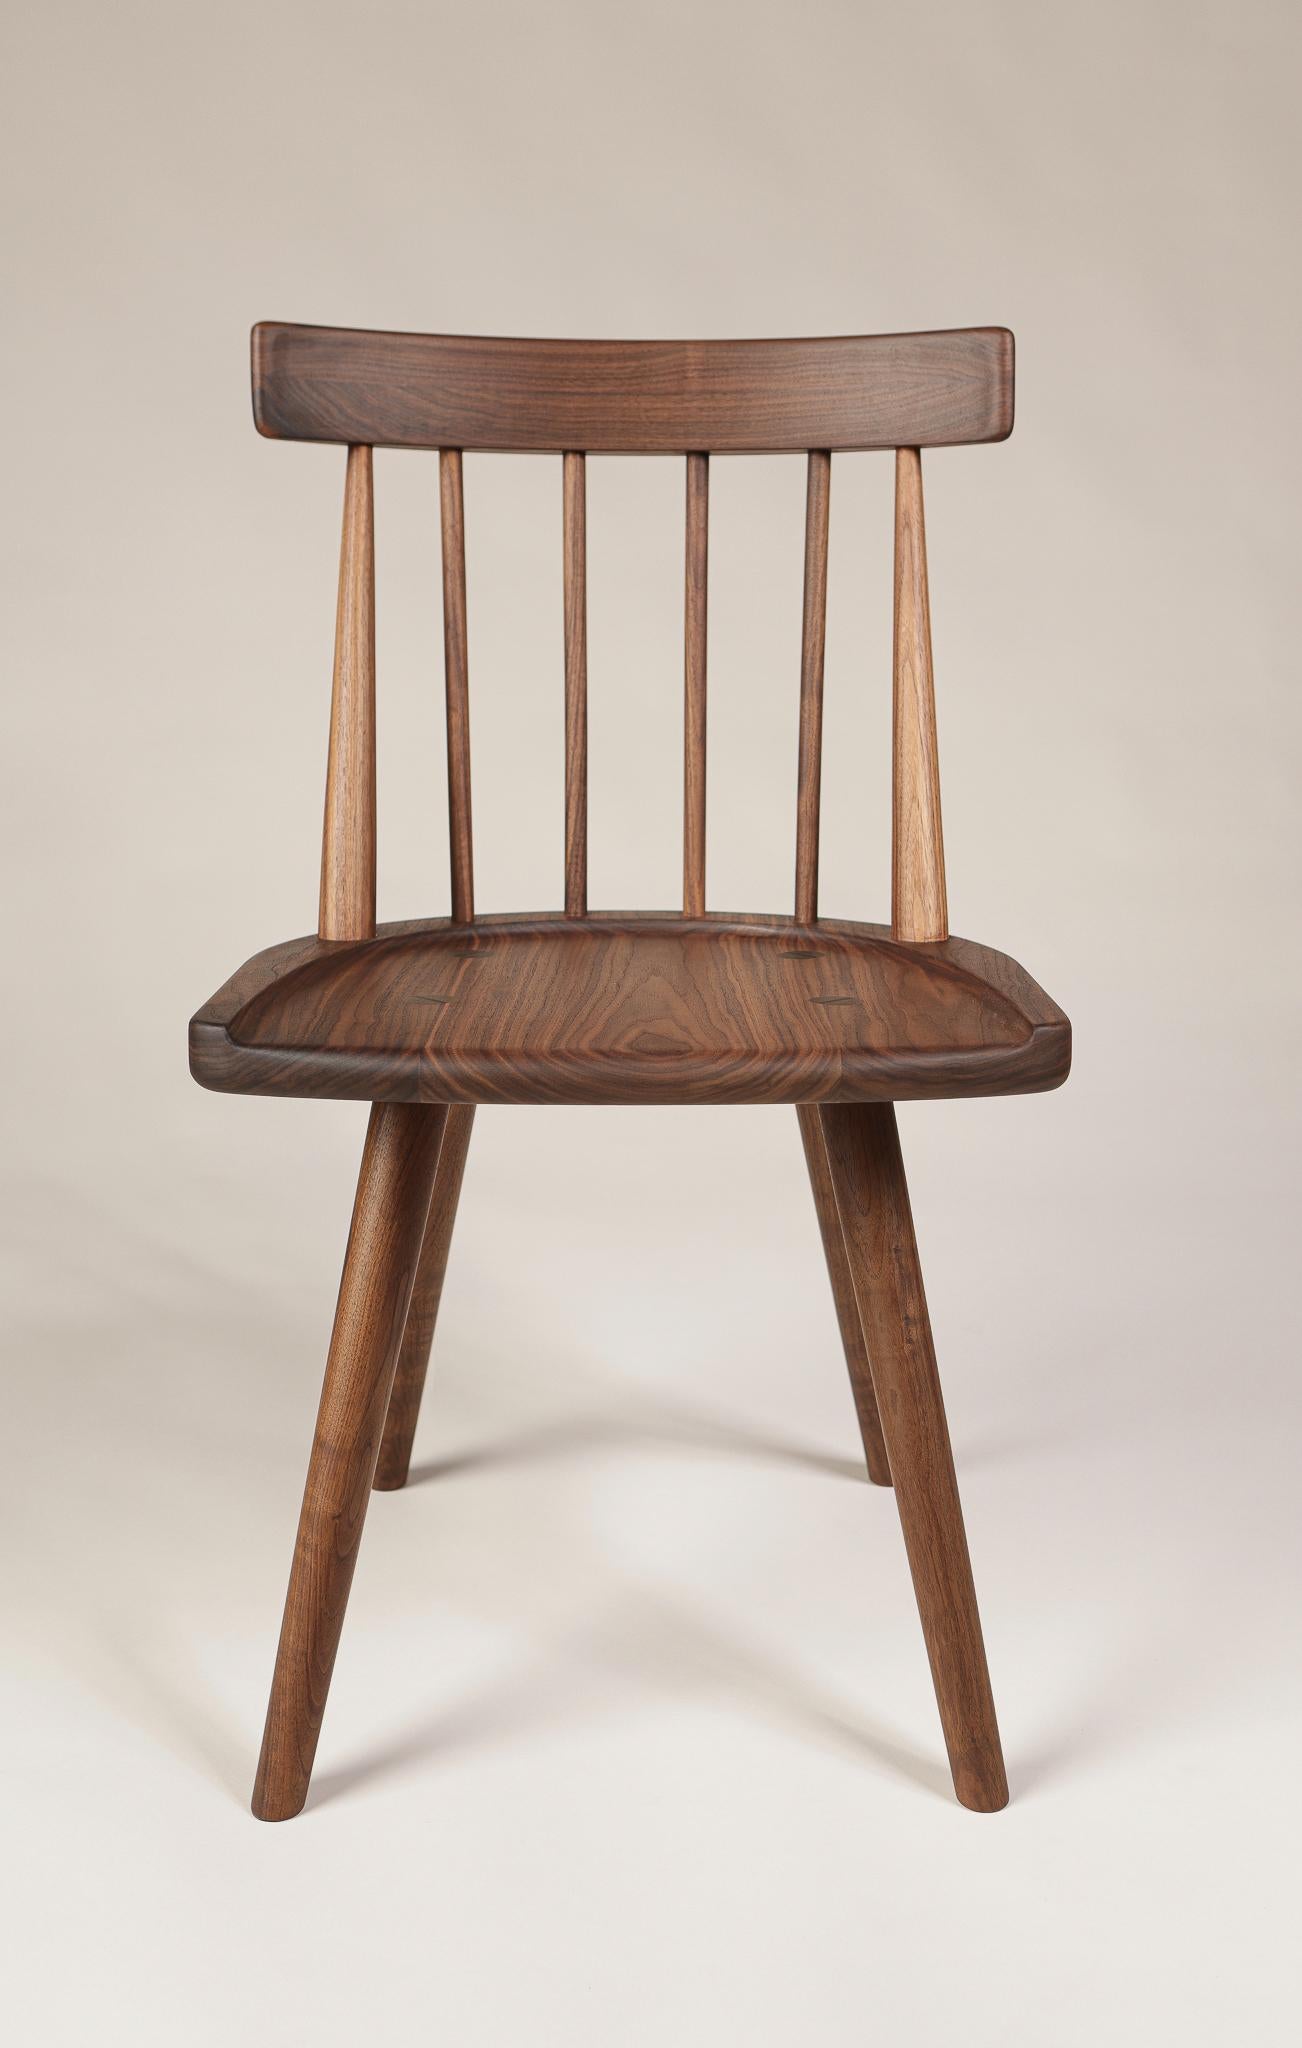 A contemporary take on the classic Windsor chair.  Hand-turned spindles feature wedged, mortice and tenon joinery for strength and aesthetic appeal, an heirloom-quality piece. 

Chairs are built to order, bespoke options always available. Wood